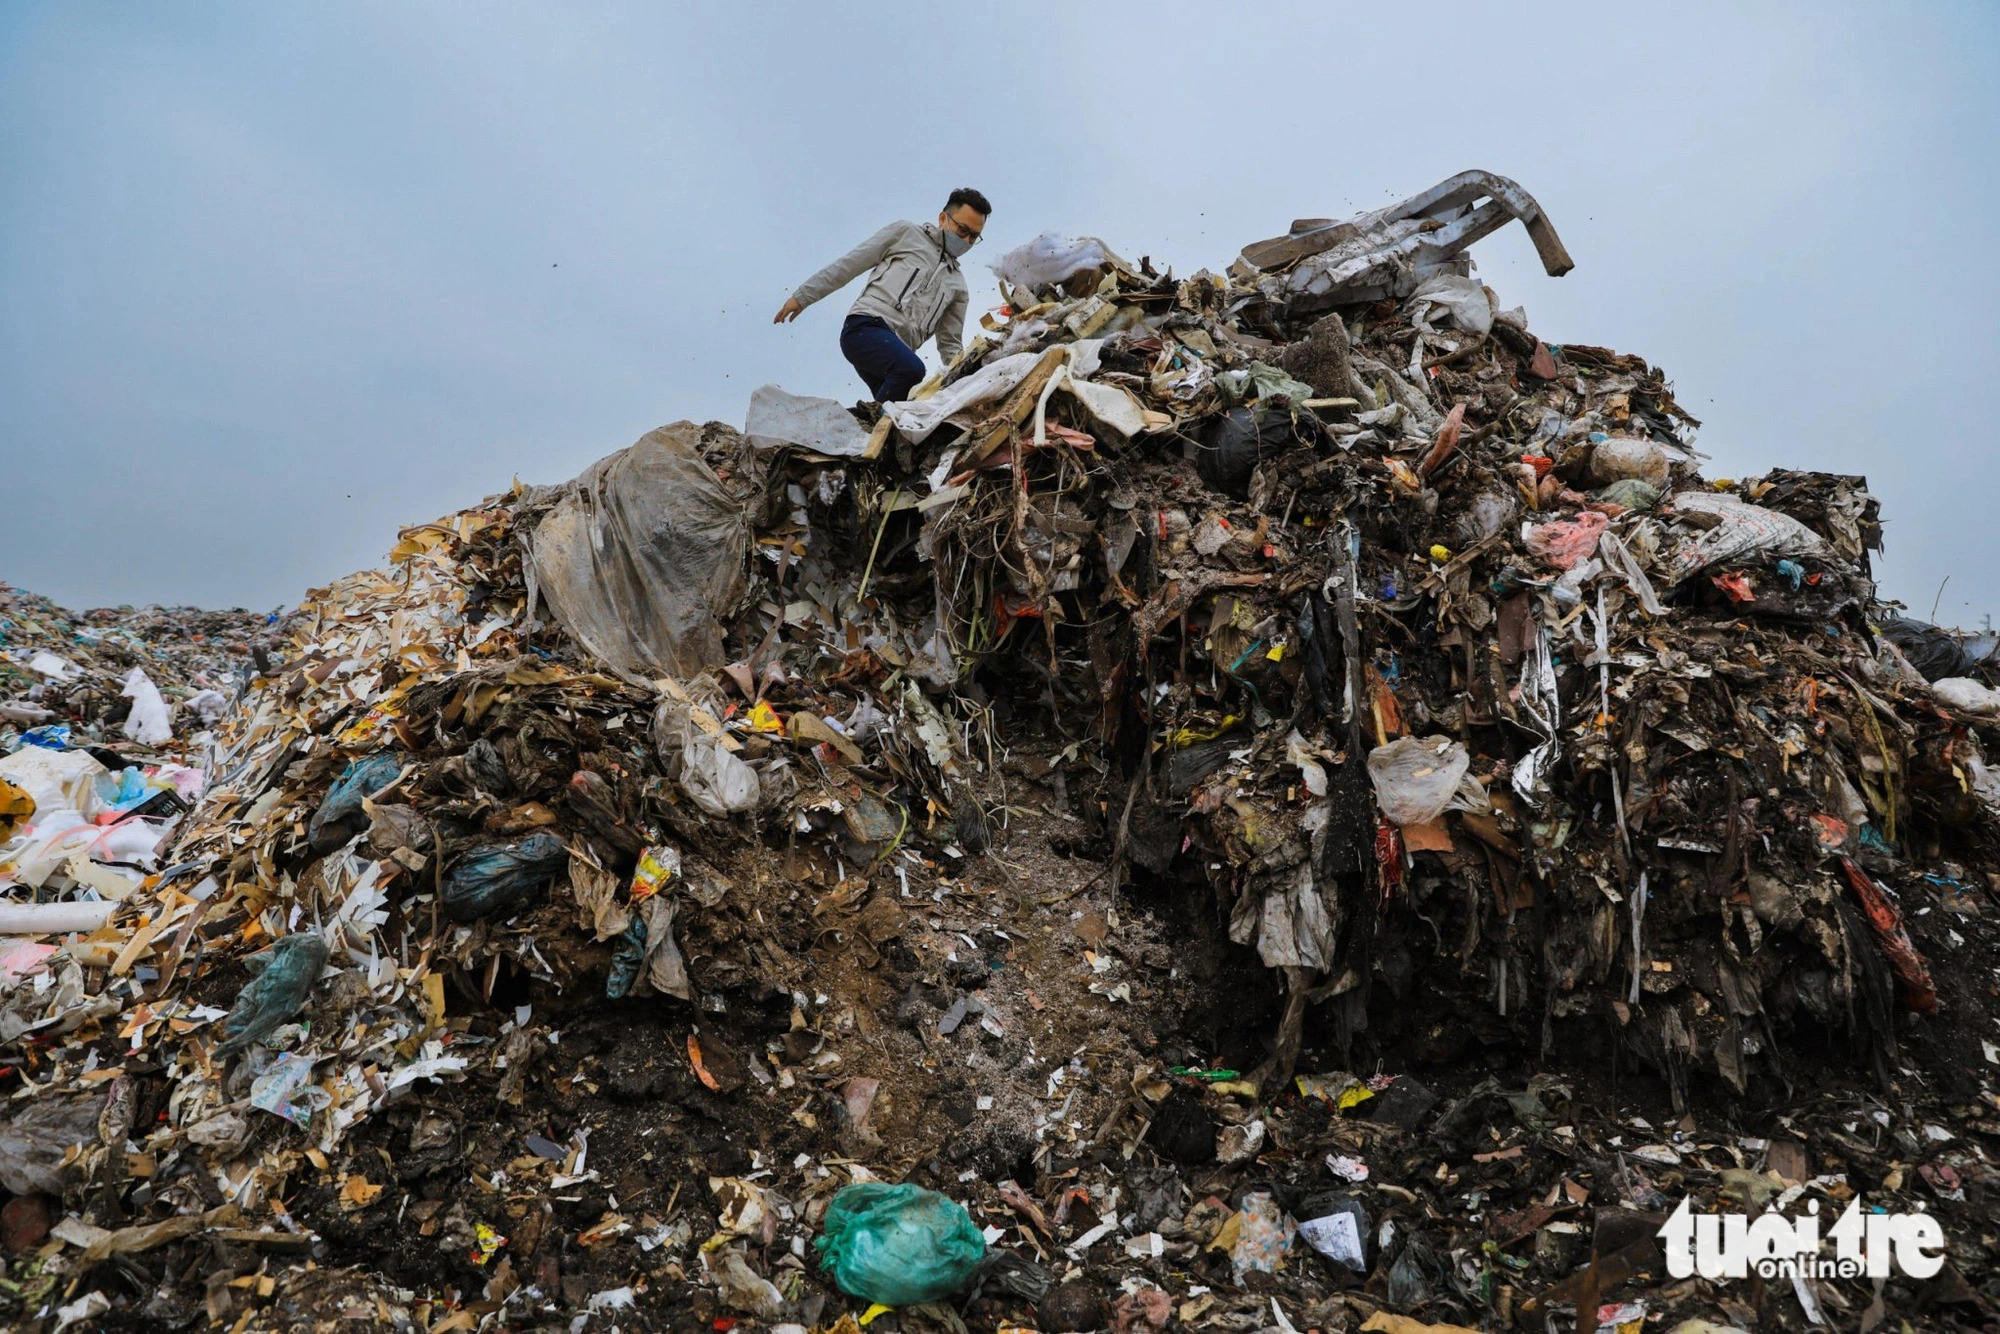 Vietnam among top 20 waste-producing countries: official